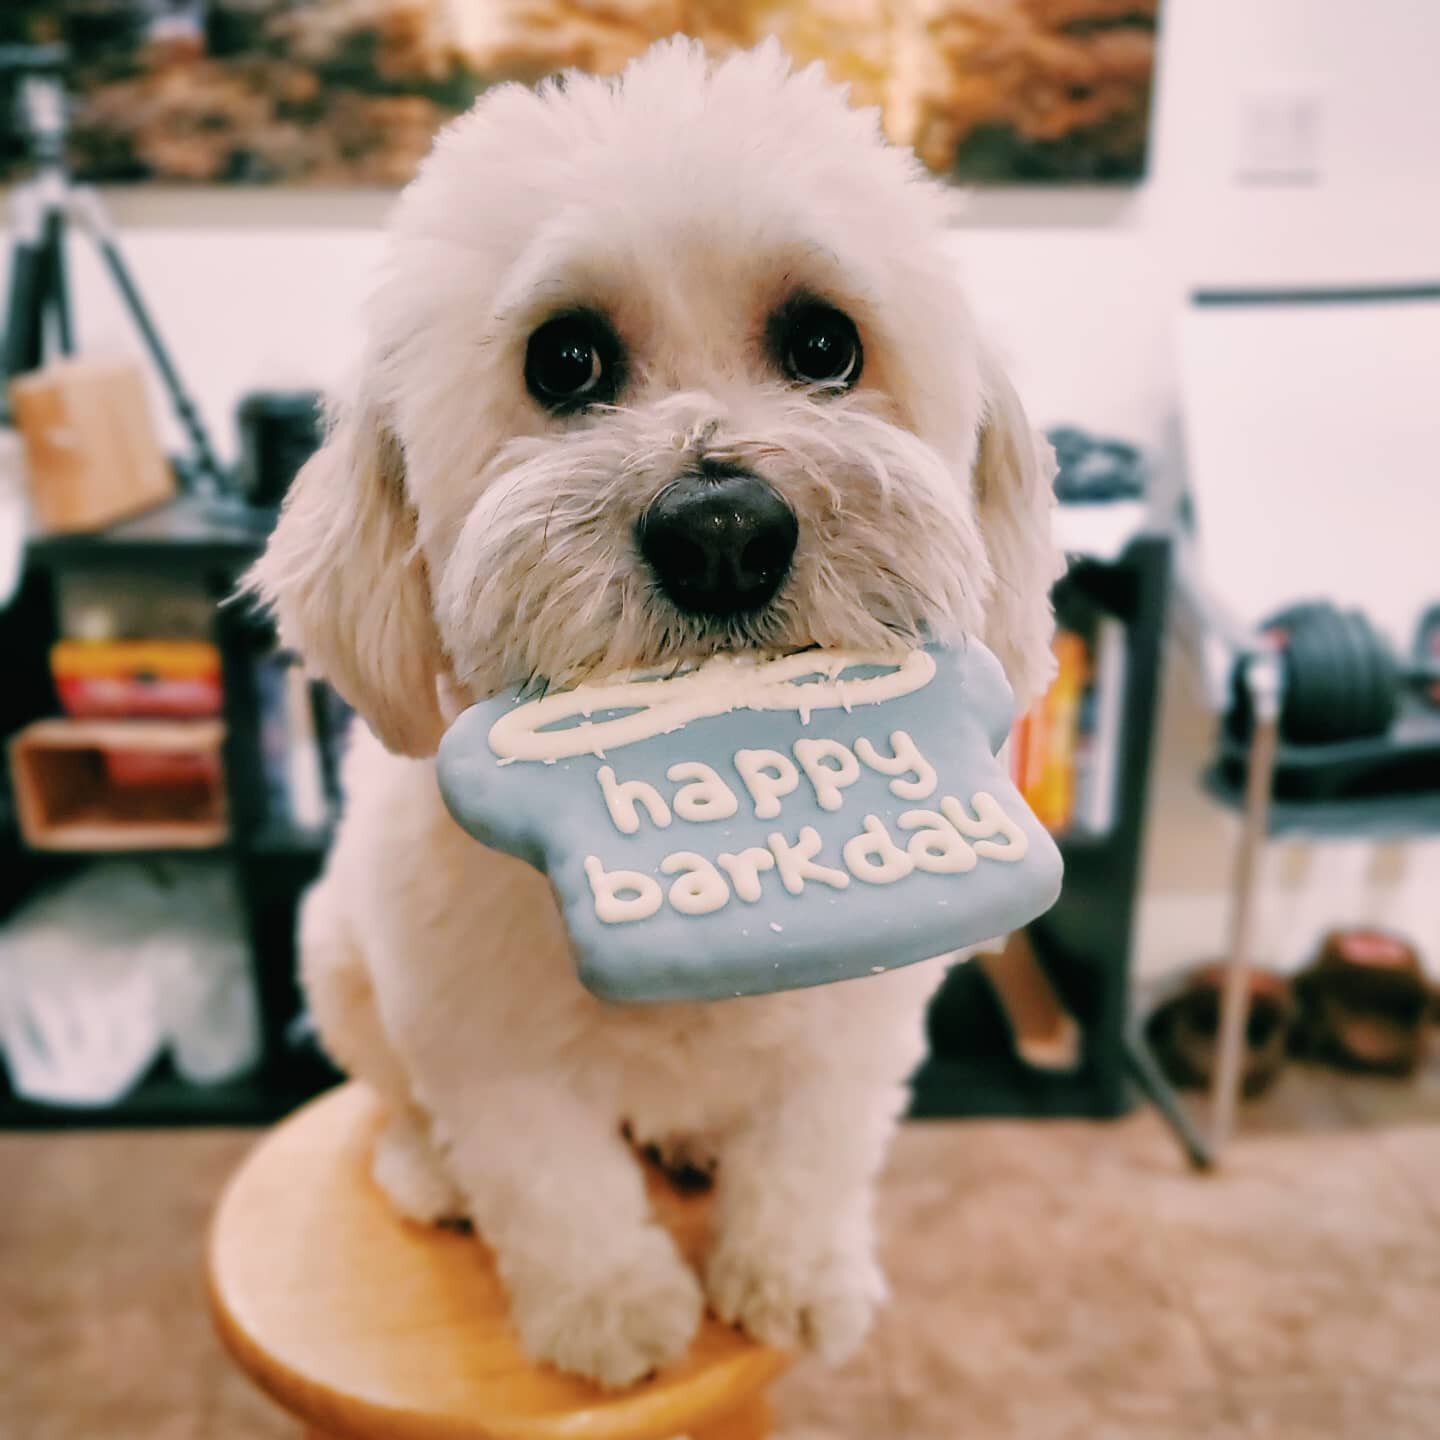 Guess which floofer turned 5 today?!?
.
.
.
.
.
.
#lhasaapso #lhasaapsosofinstagram #bichon #mixedbreed #puppers #doglover #dogsofinstagram #dogstagram #doggogram #puppy #doggo #dogtography #doggy #doggybirthday #doggobirthday #dogbirthday #puppylife